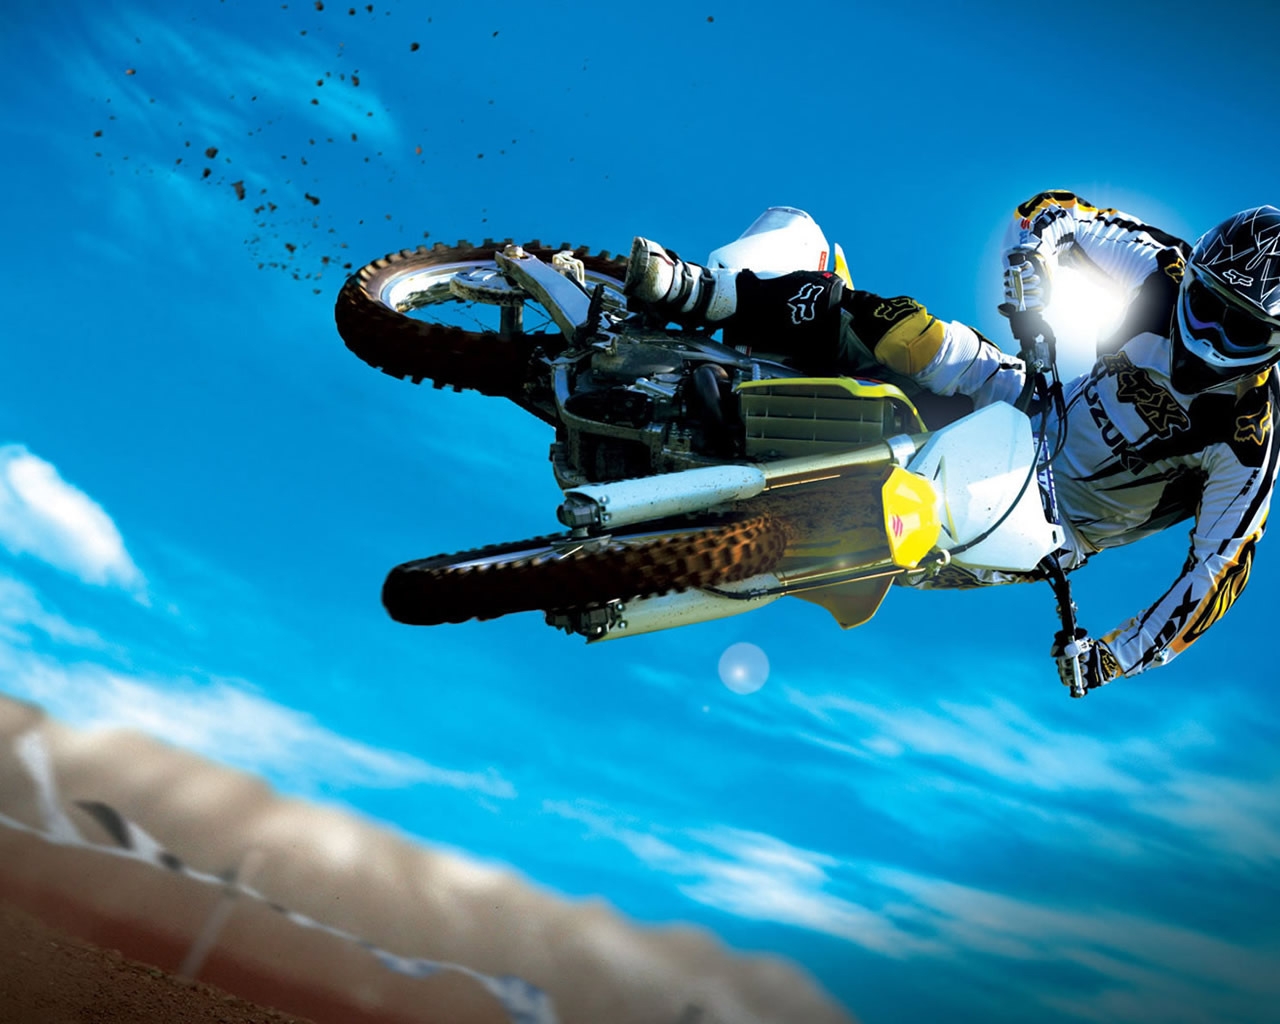 Extreme Moto Sport for 1280 x 1024 resolution